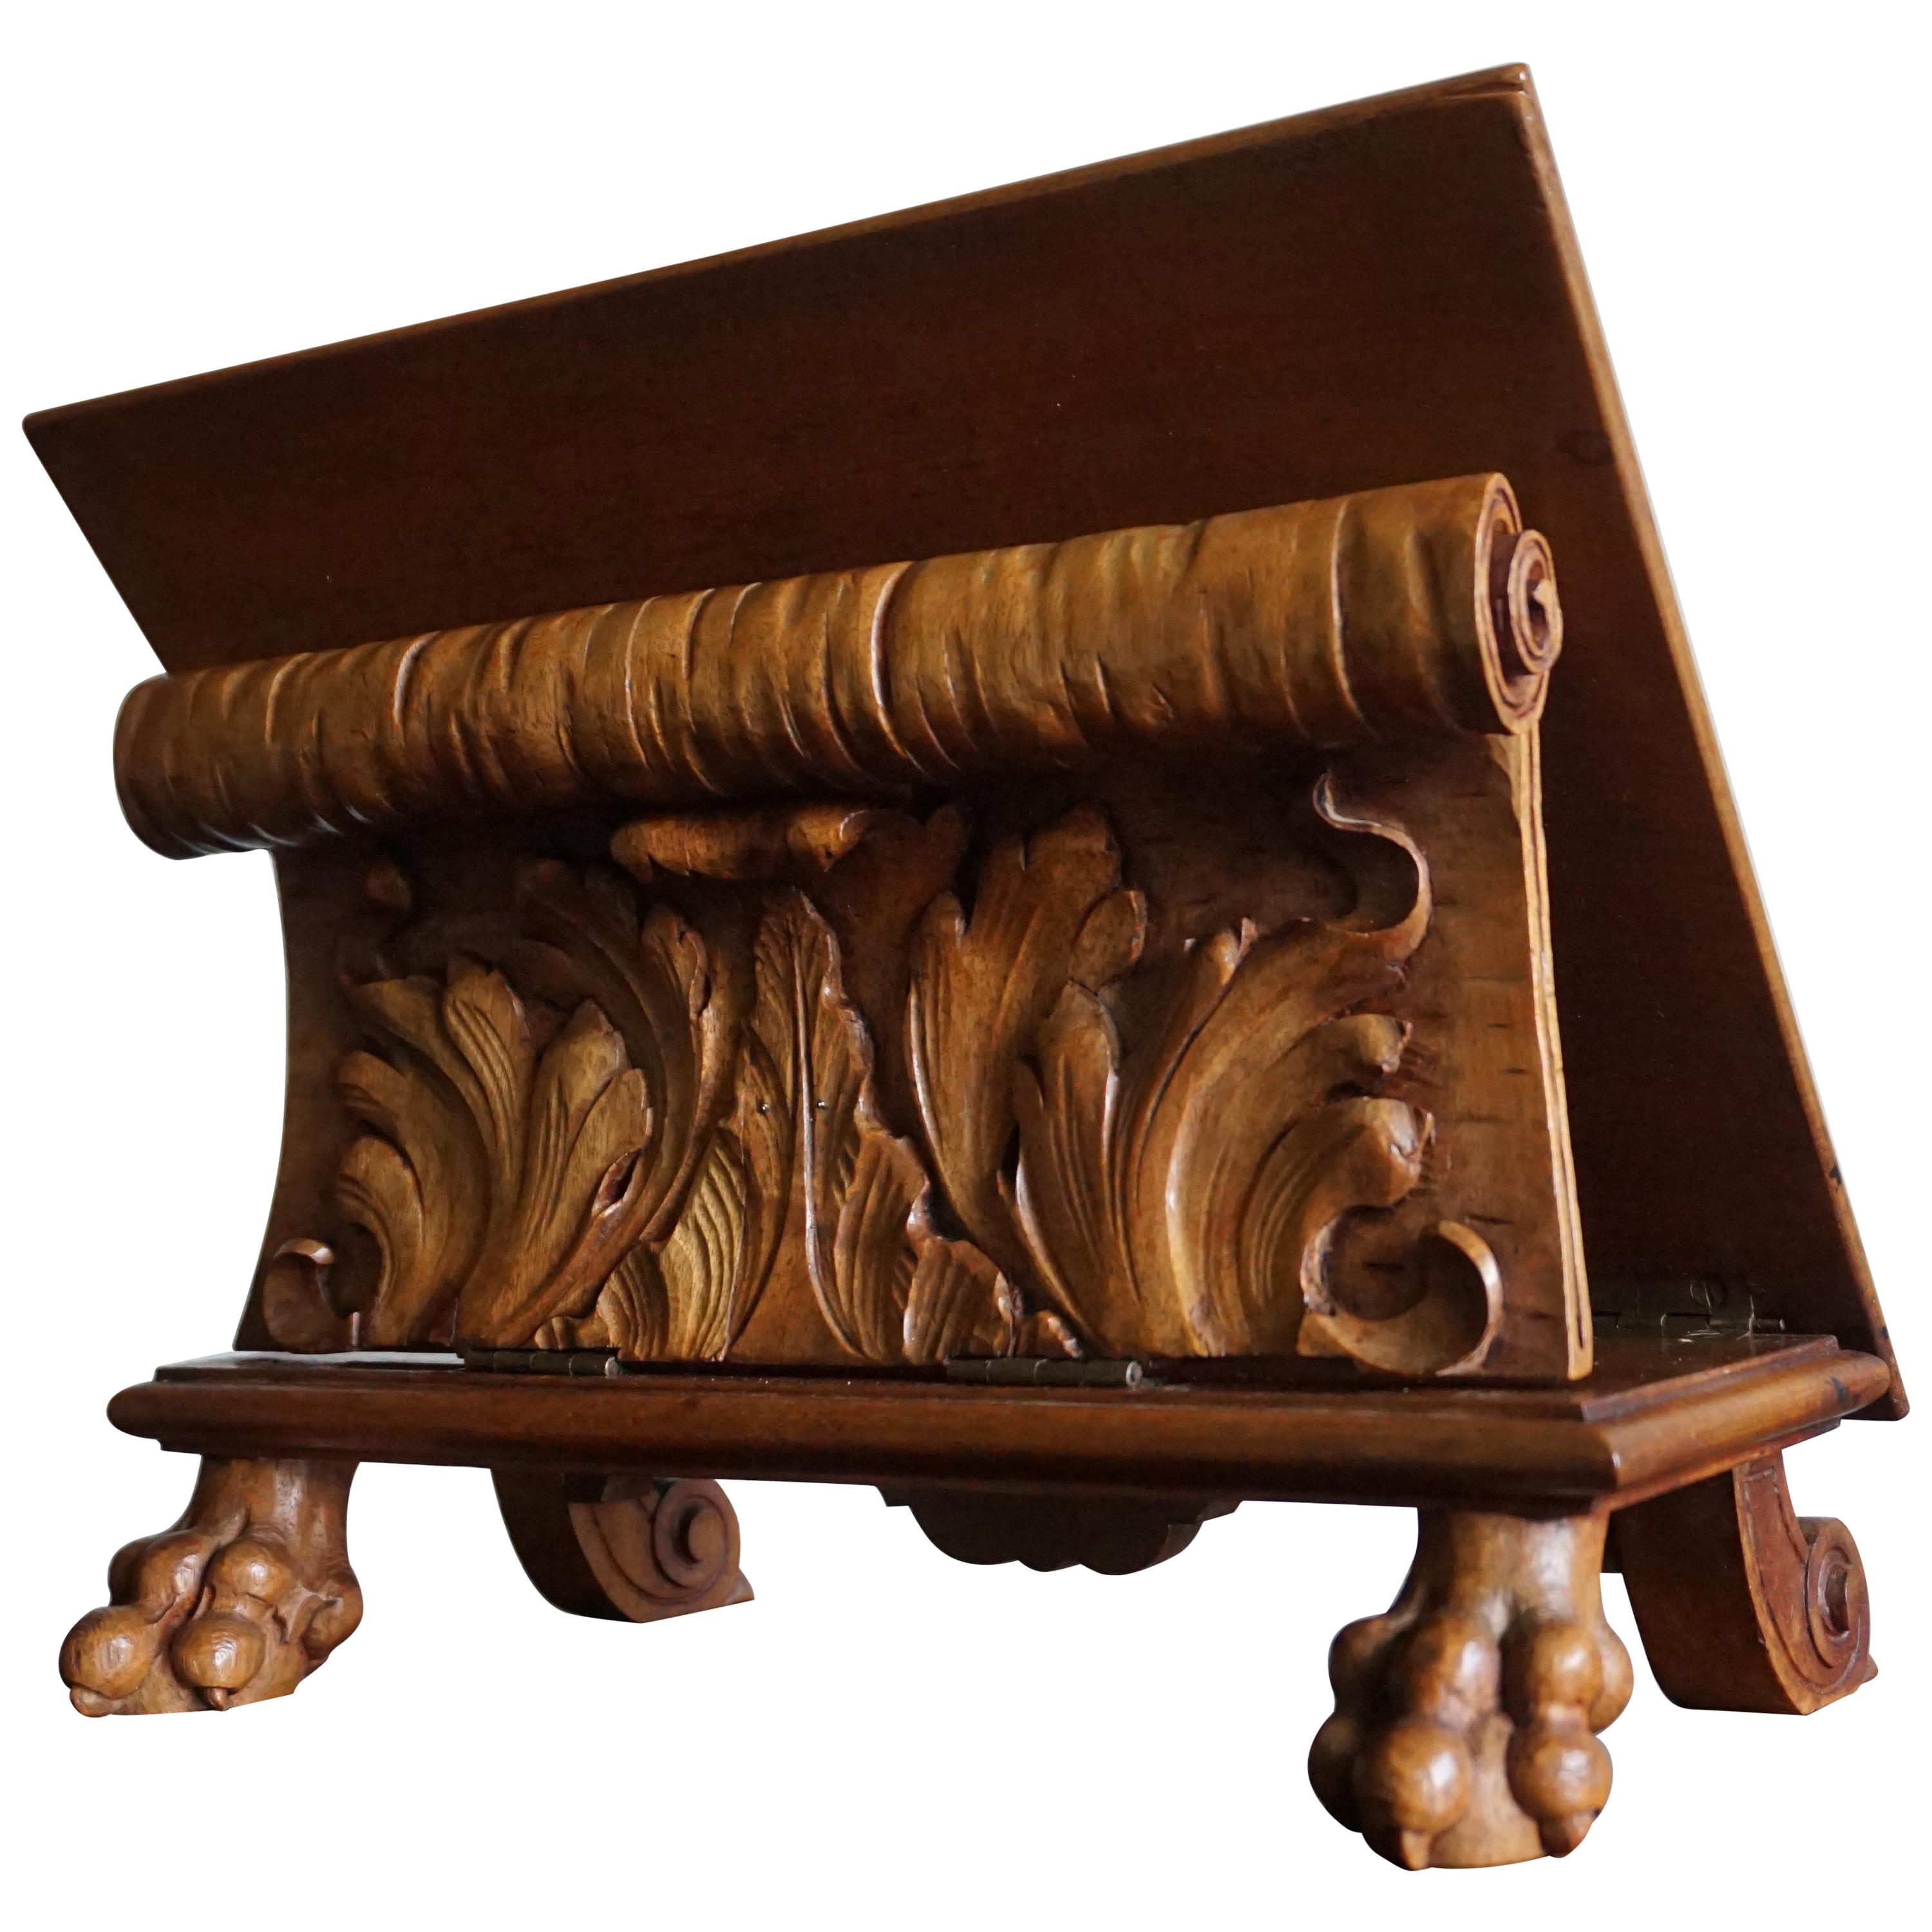 Antique & Unique Adjustable Bookstand with Hand Carved Leaf Pattern & Claw Feet